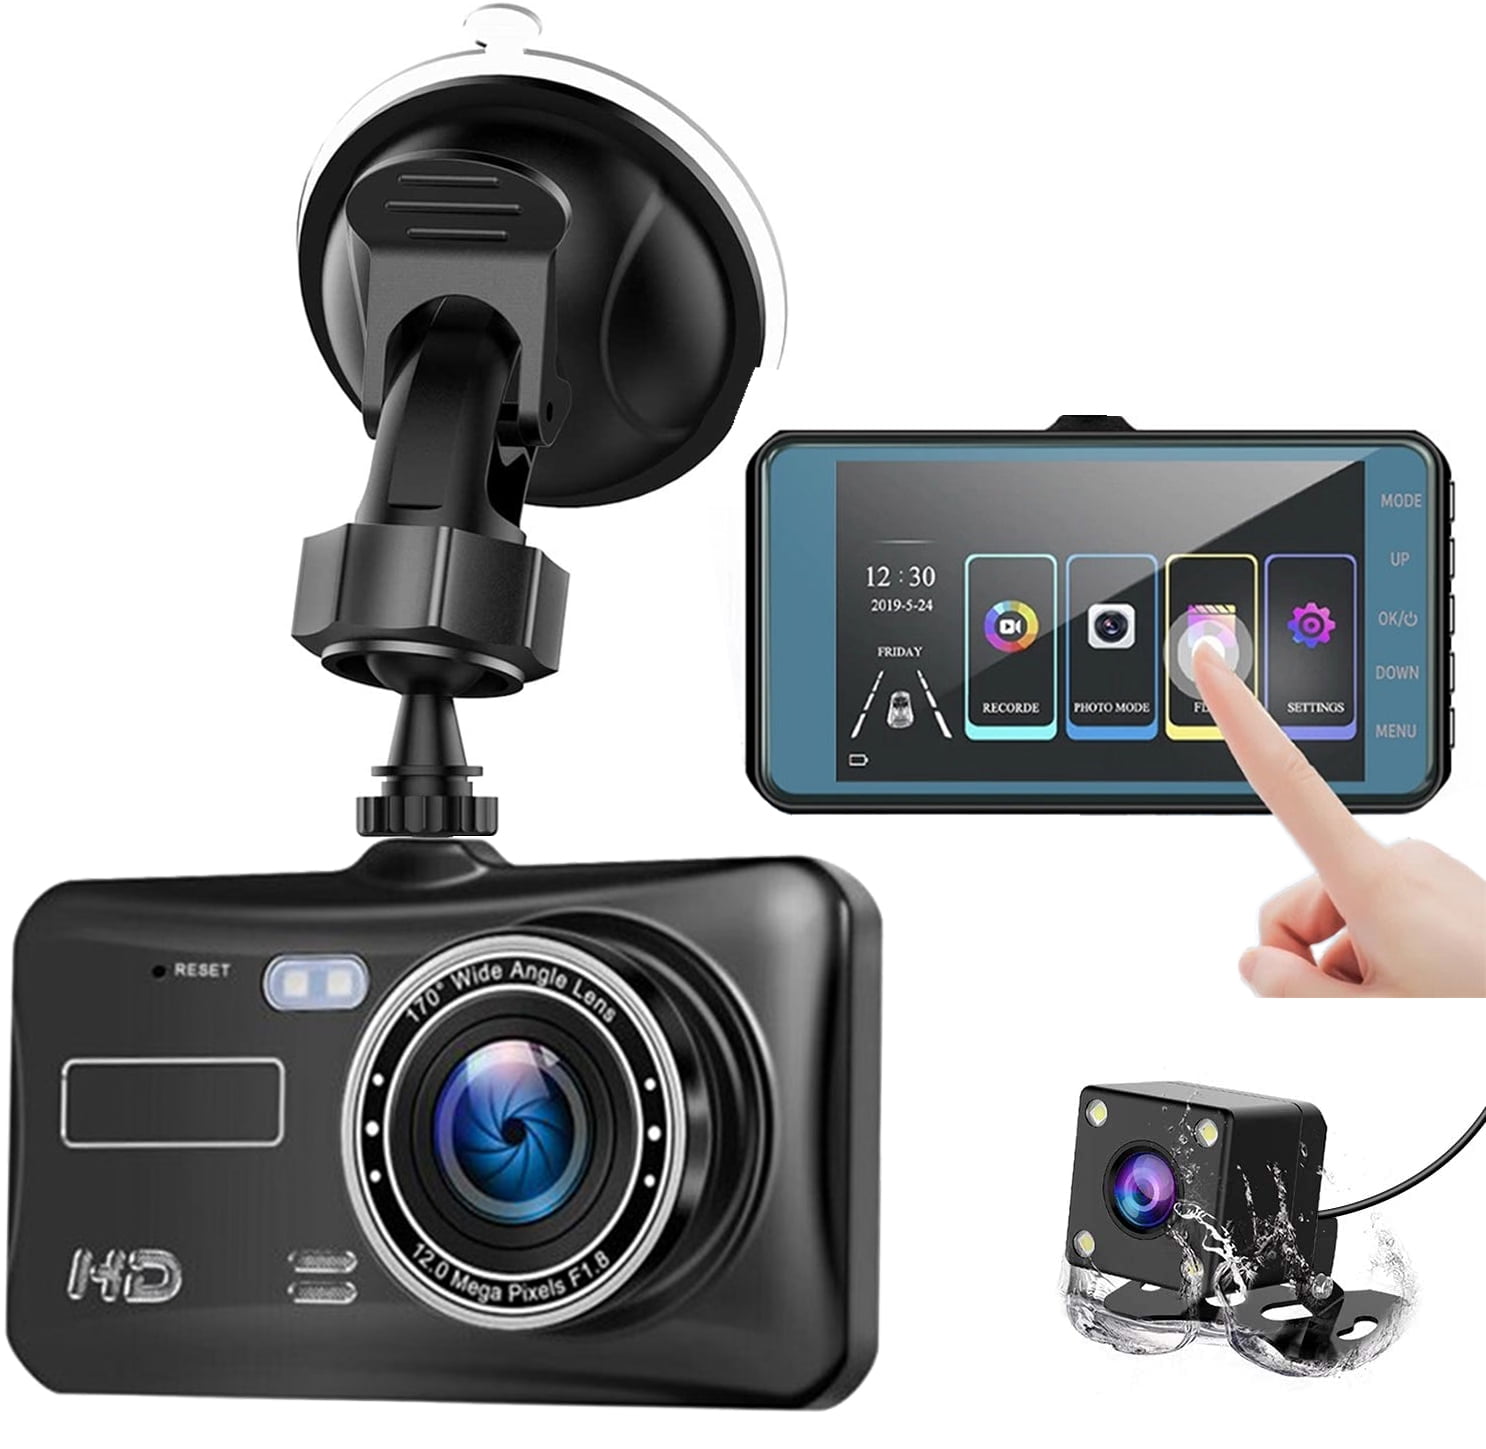 Dash Cam 1080P Full HD Car Camera DVR Dashboard Camera Video Recorder In Car Camera Dashcam for Cars 170 Wide Angle WDR With Packing Monitor Night Vision Motion Detection and G-sensor 